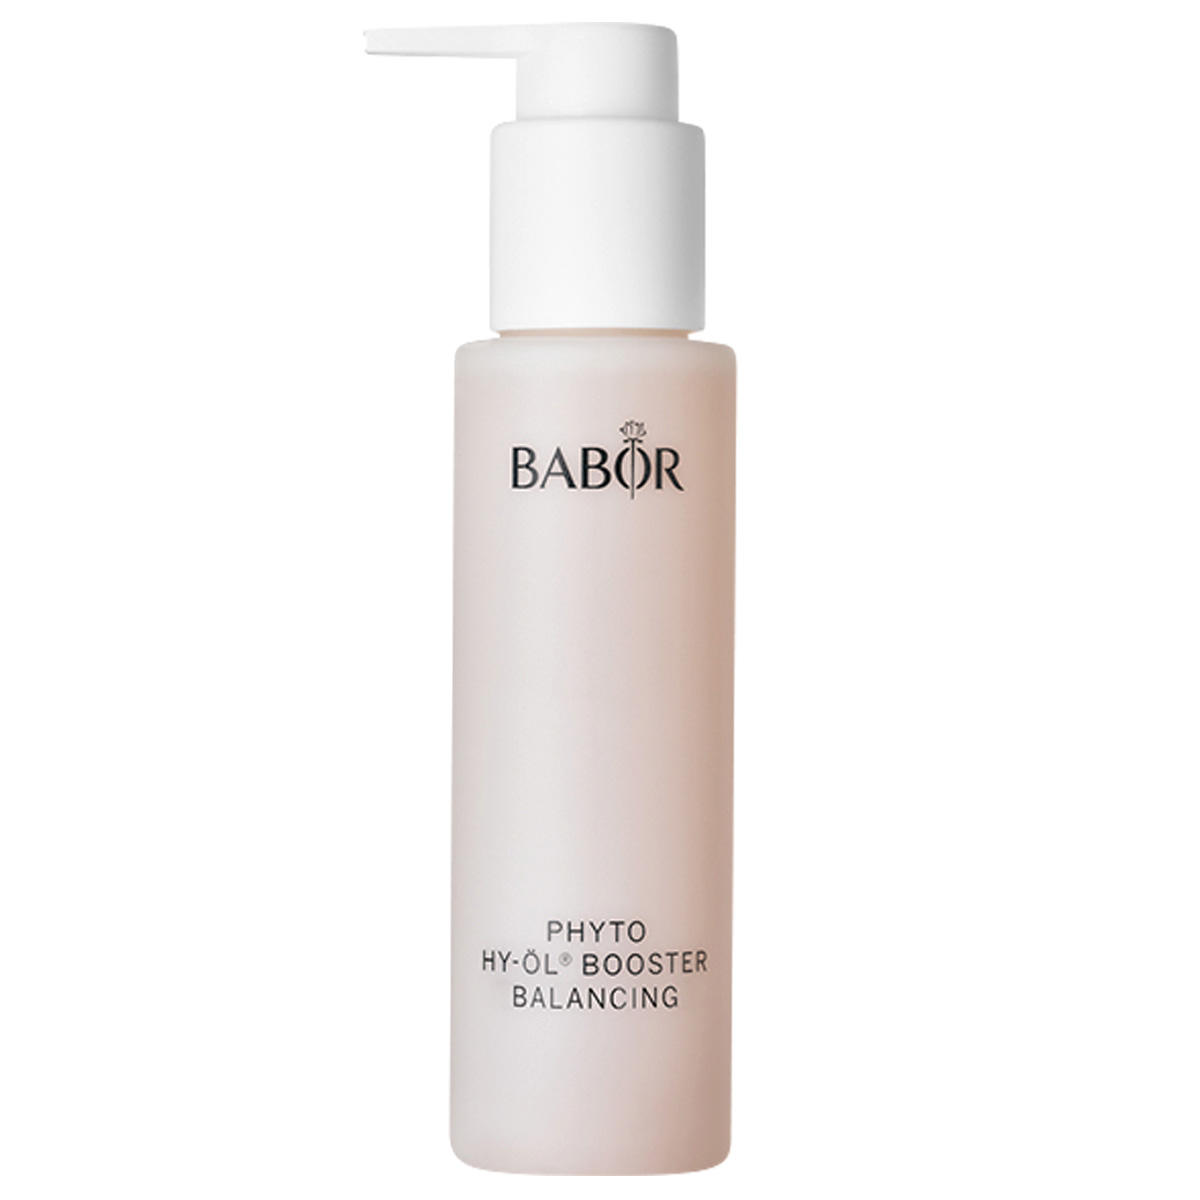 BABOR CLEANSING Phyto HY-ÖL Booster Balancing 100 ml - 1